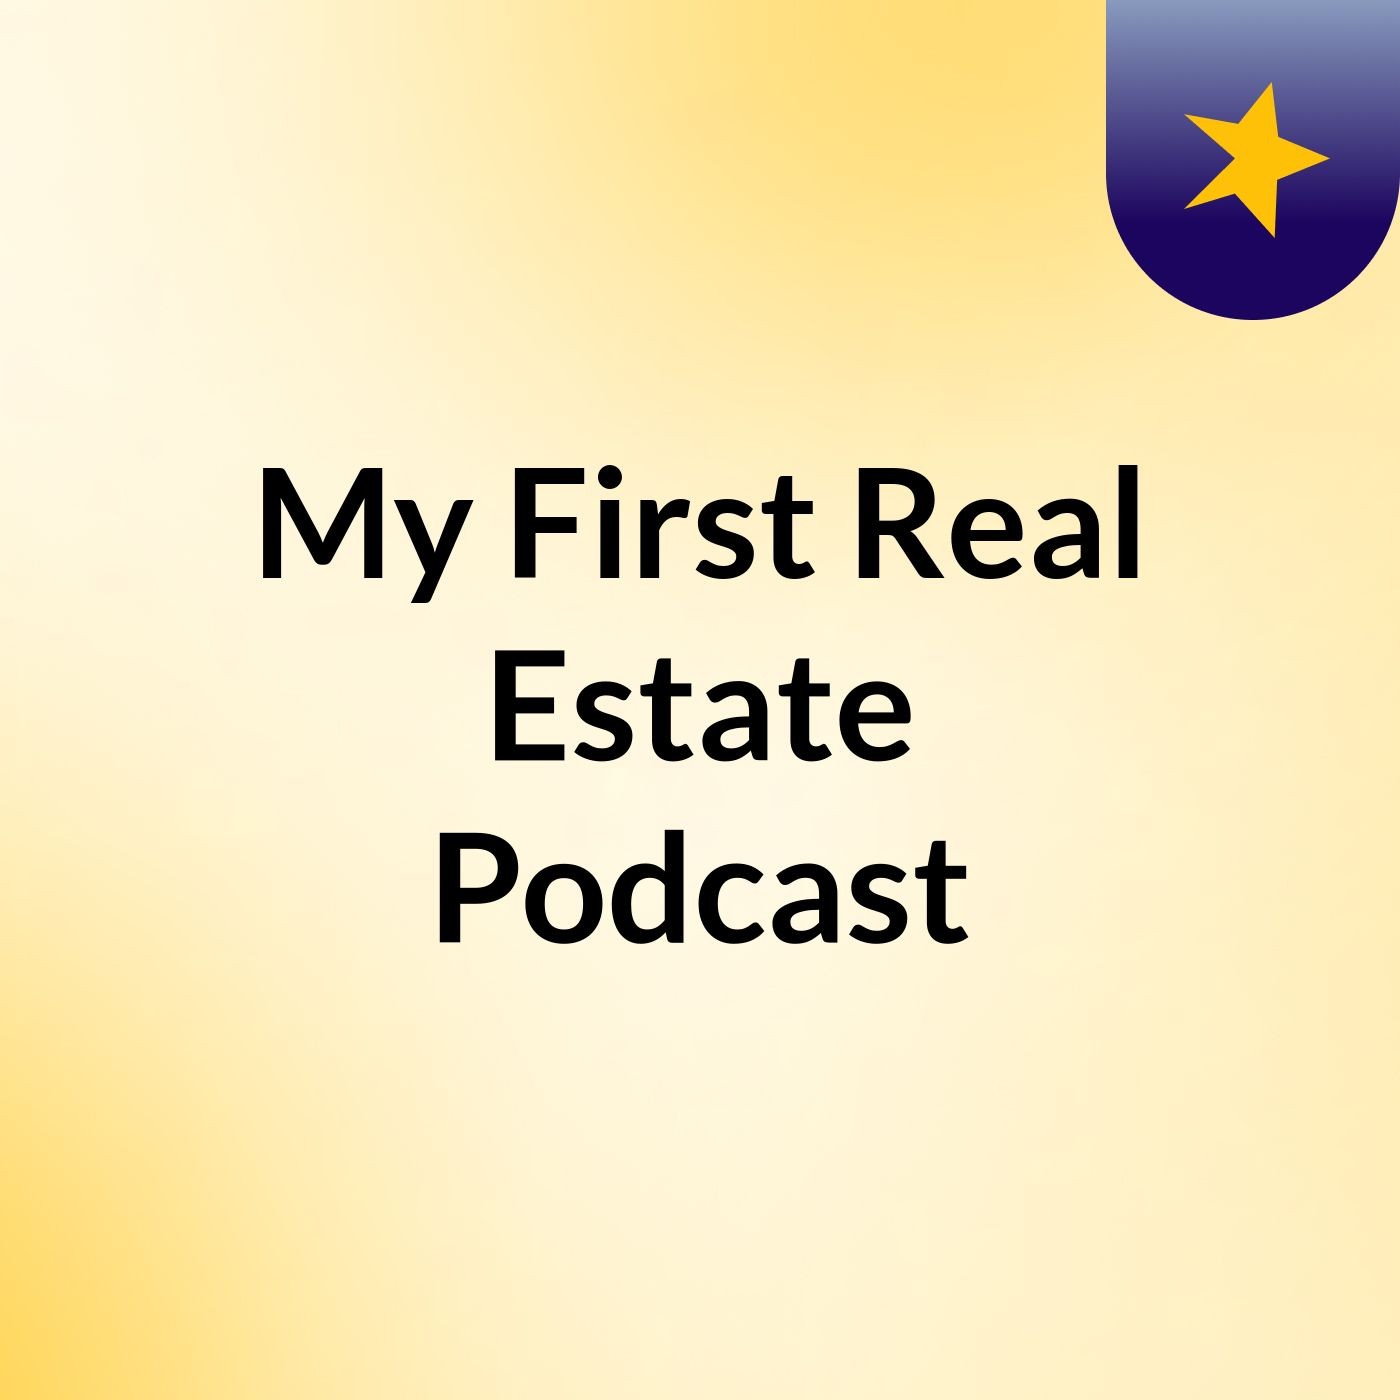 My First Real Estate Podcast